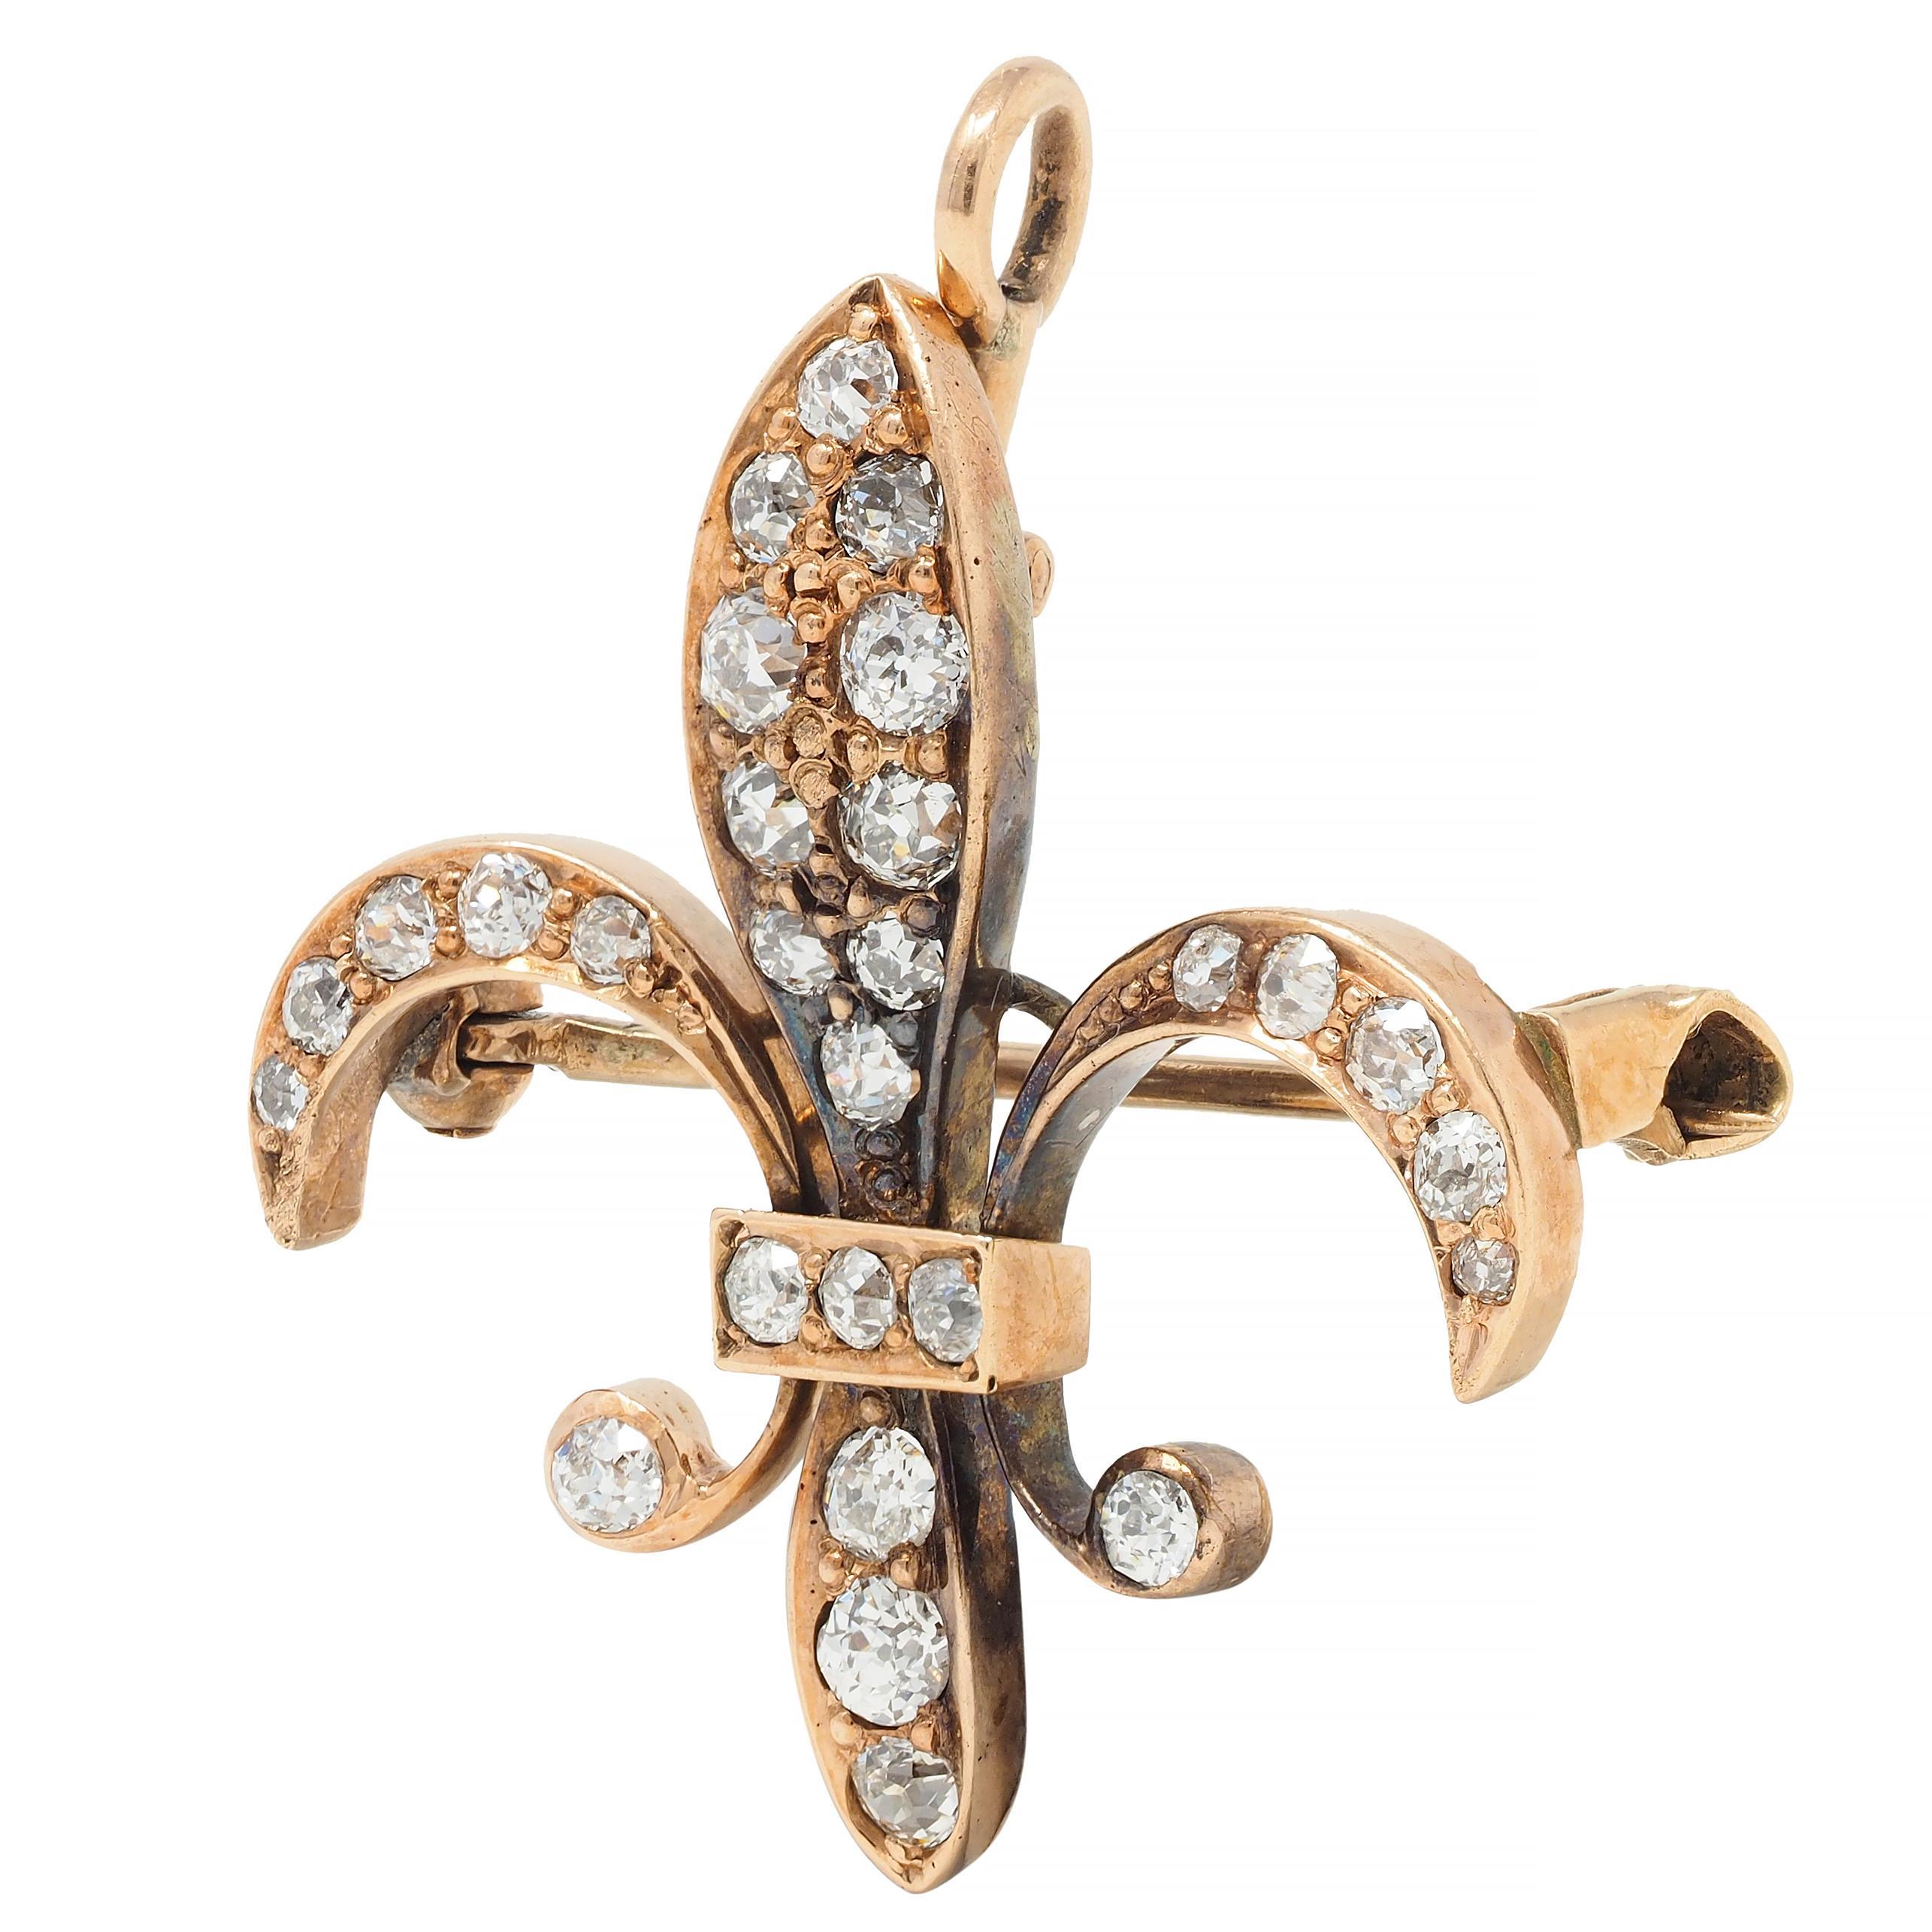 Designed as a stylized fleur-de-lis form bead set with old European cut diamonds
Weighing approximately 0.72 carat total - H/J color with VS2 clarity
Completed by hinged pinstem with locking closure
With hinged optional bale 
Stamped for 10 karat